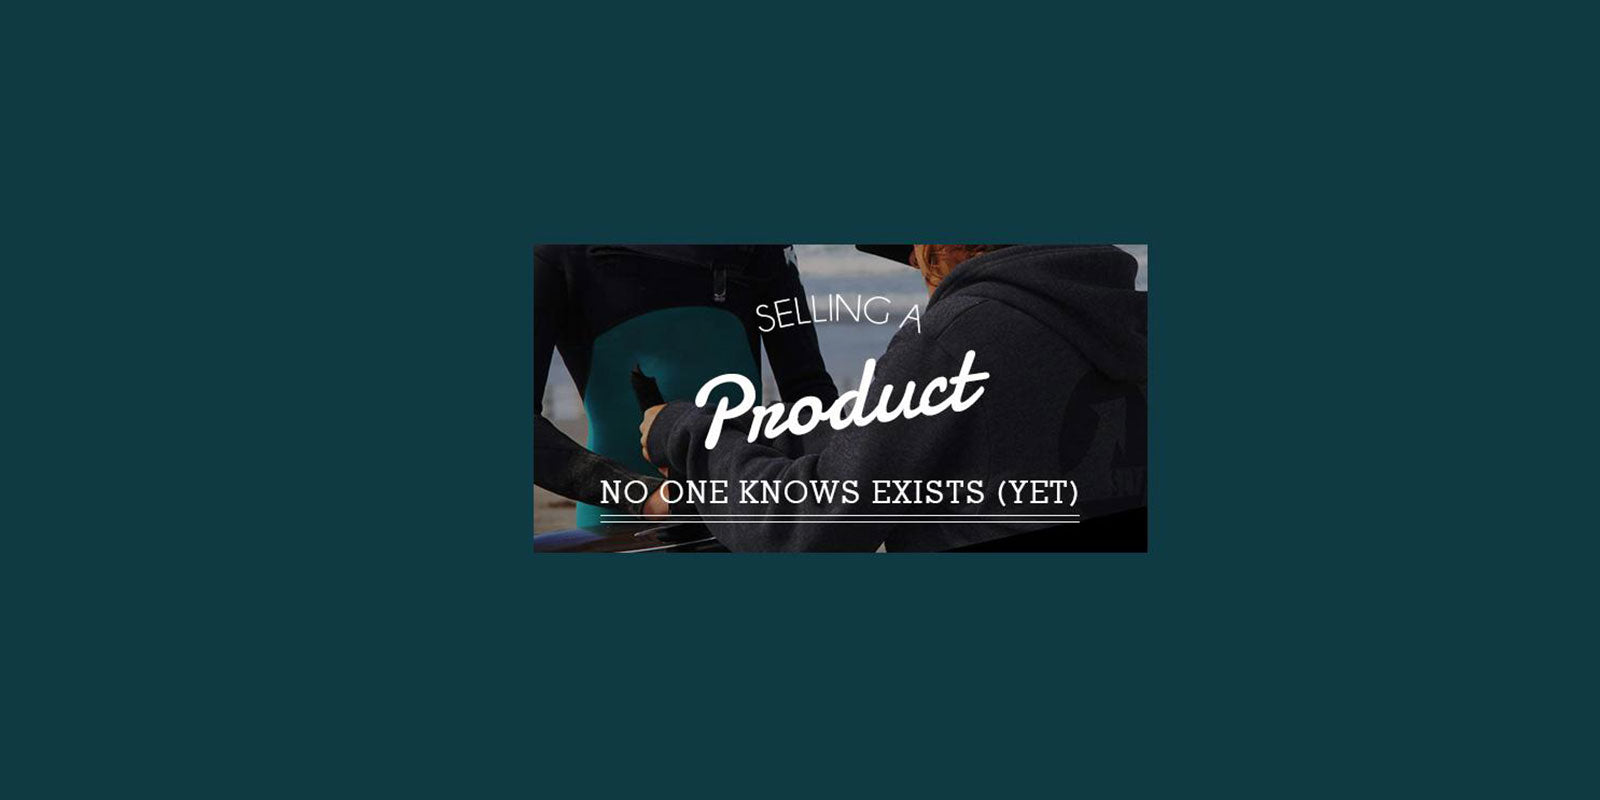 Shopify Masters Interview: Selling a product very few people know exist